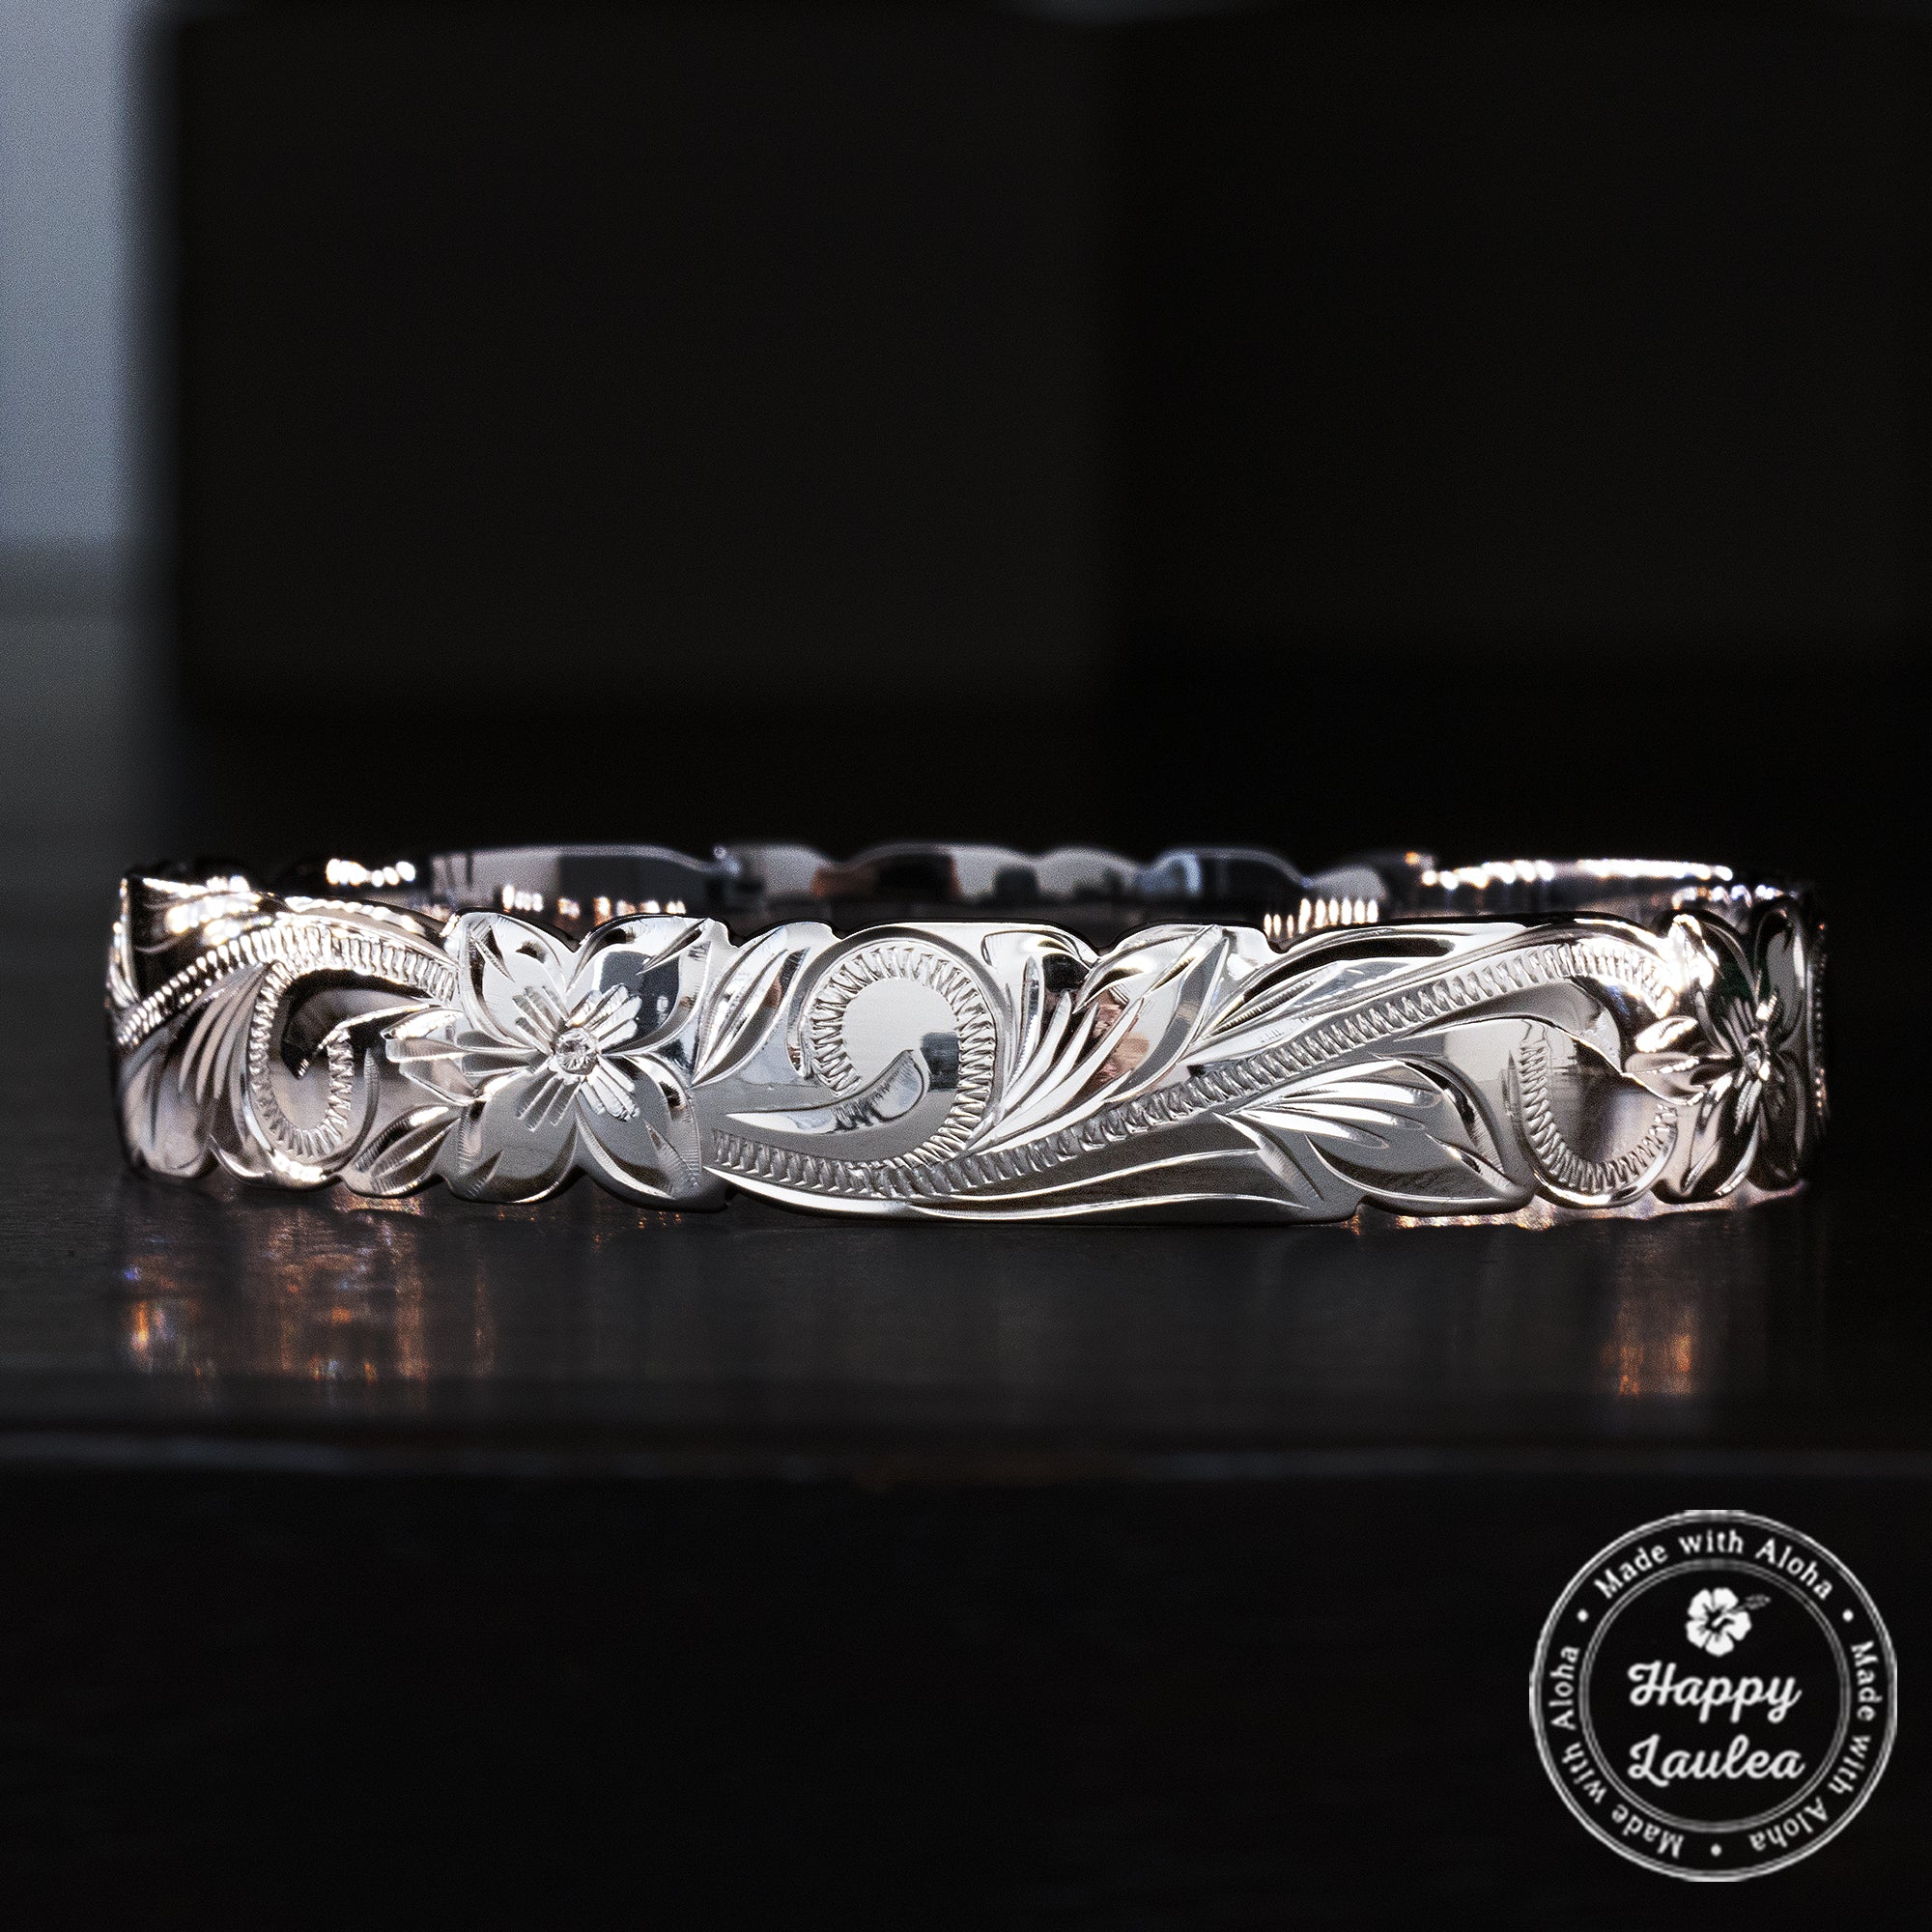 Sterling Silver Bangle with Cutout Wave Edges [10mm] Hand Engraved Hawaiian Heritage Design